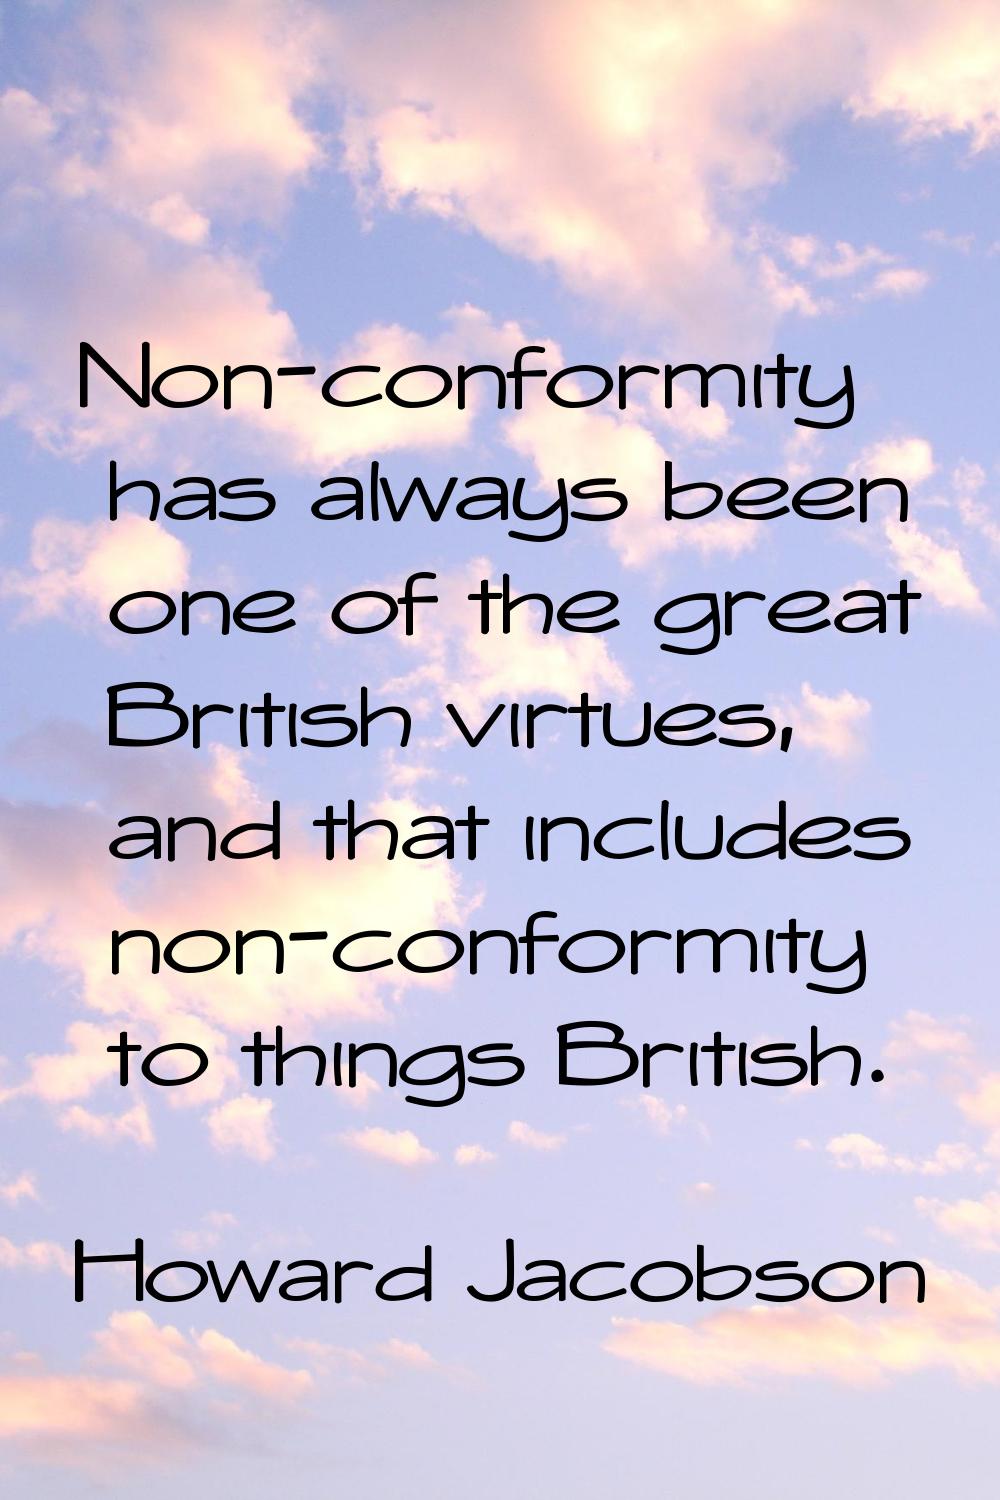 Non-conformity has always been one of the great British virtues, and that includes non-conformity t